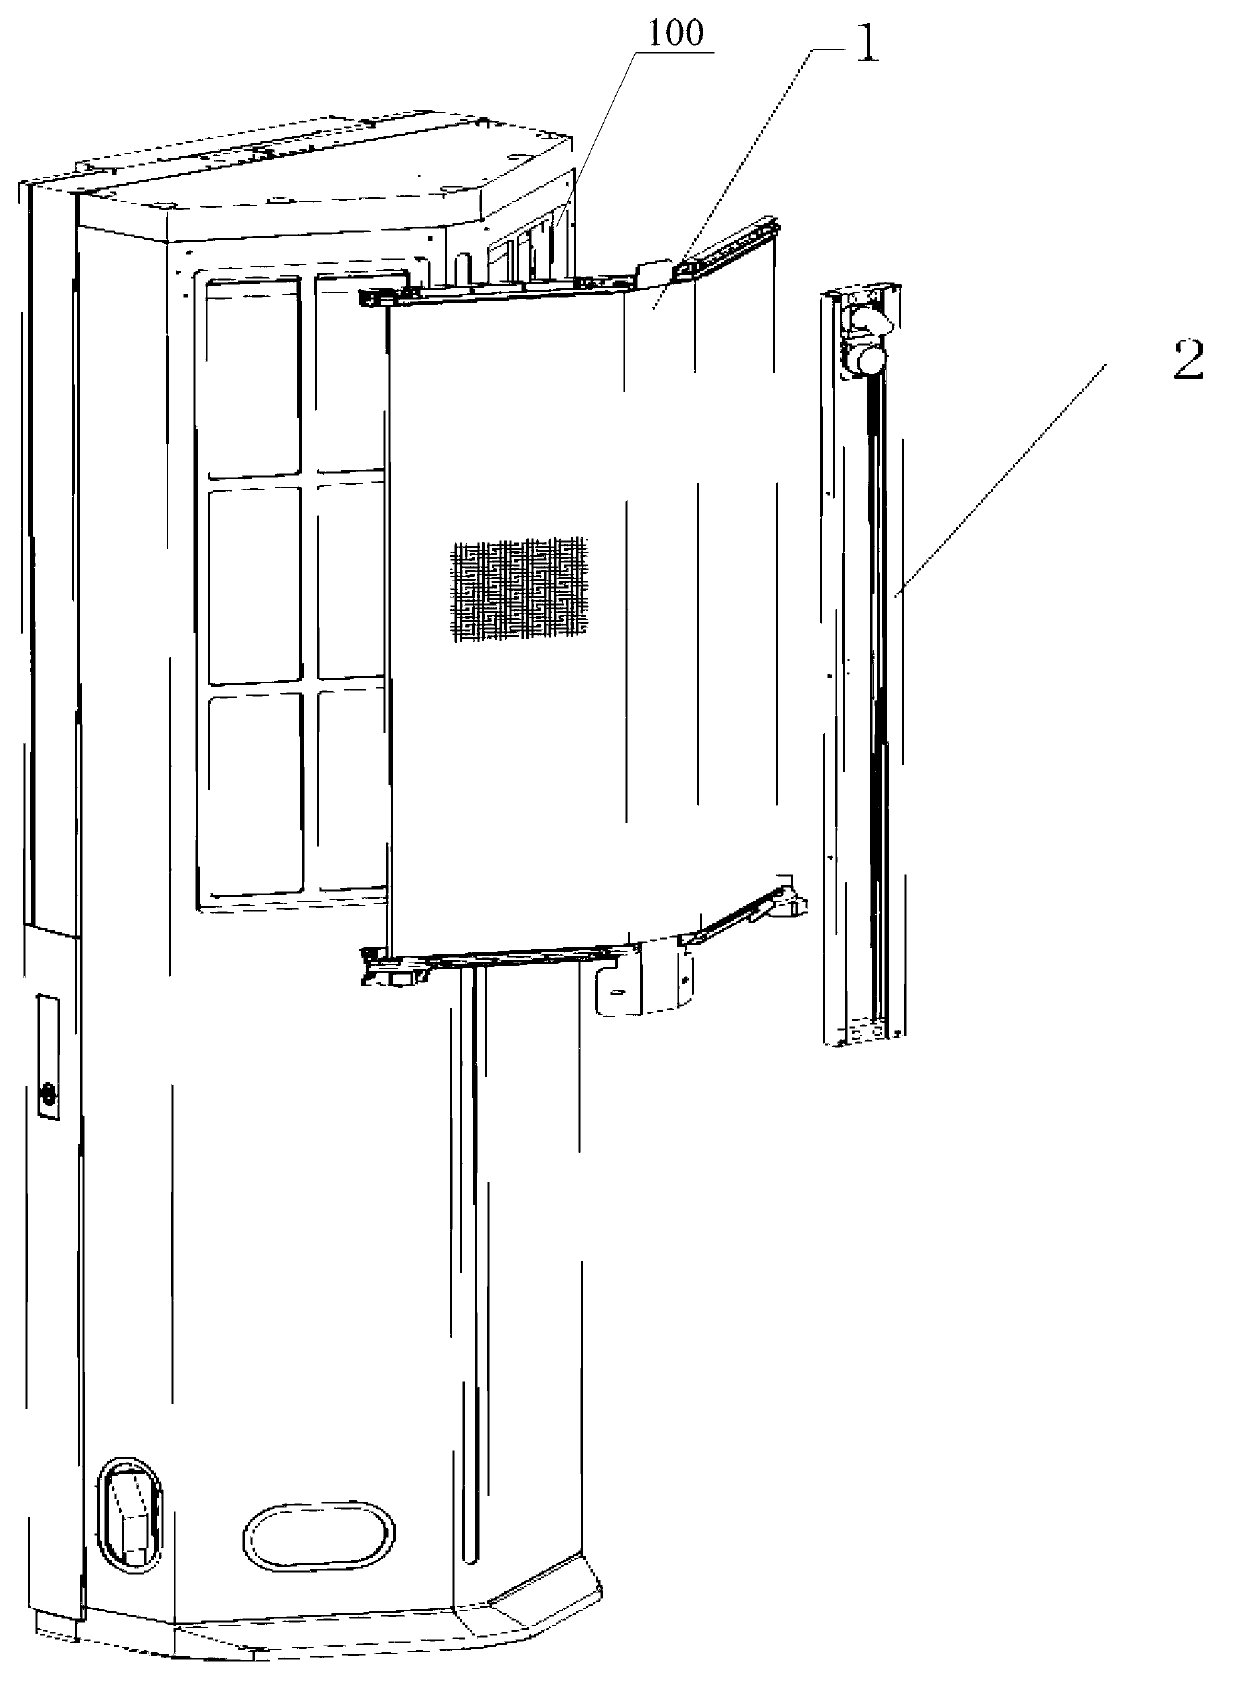 Filter screen cleaning device and air conditioner indoor unit